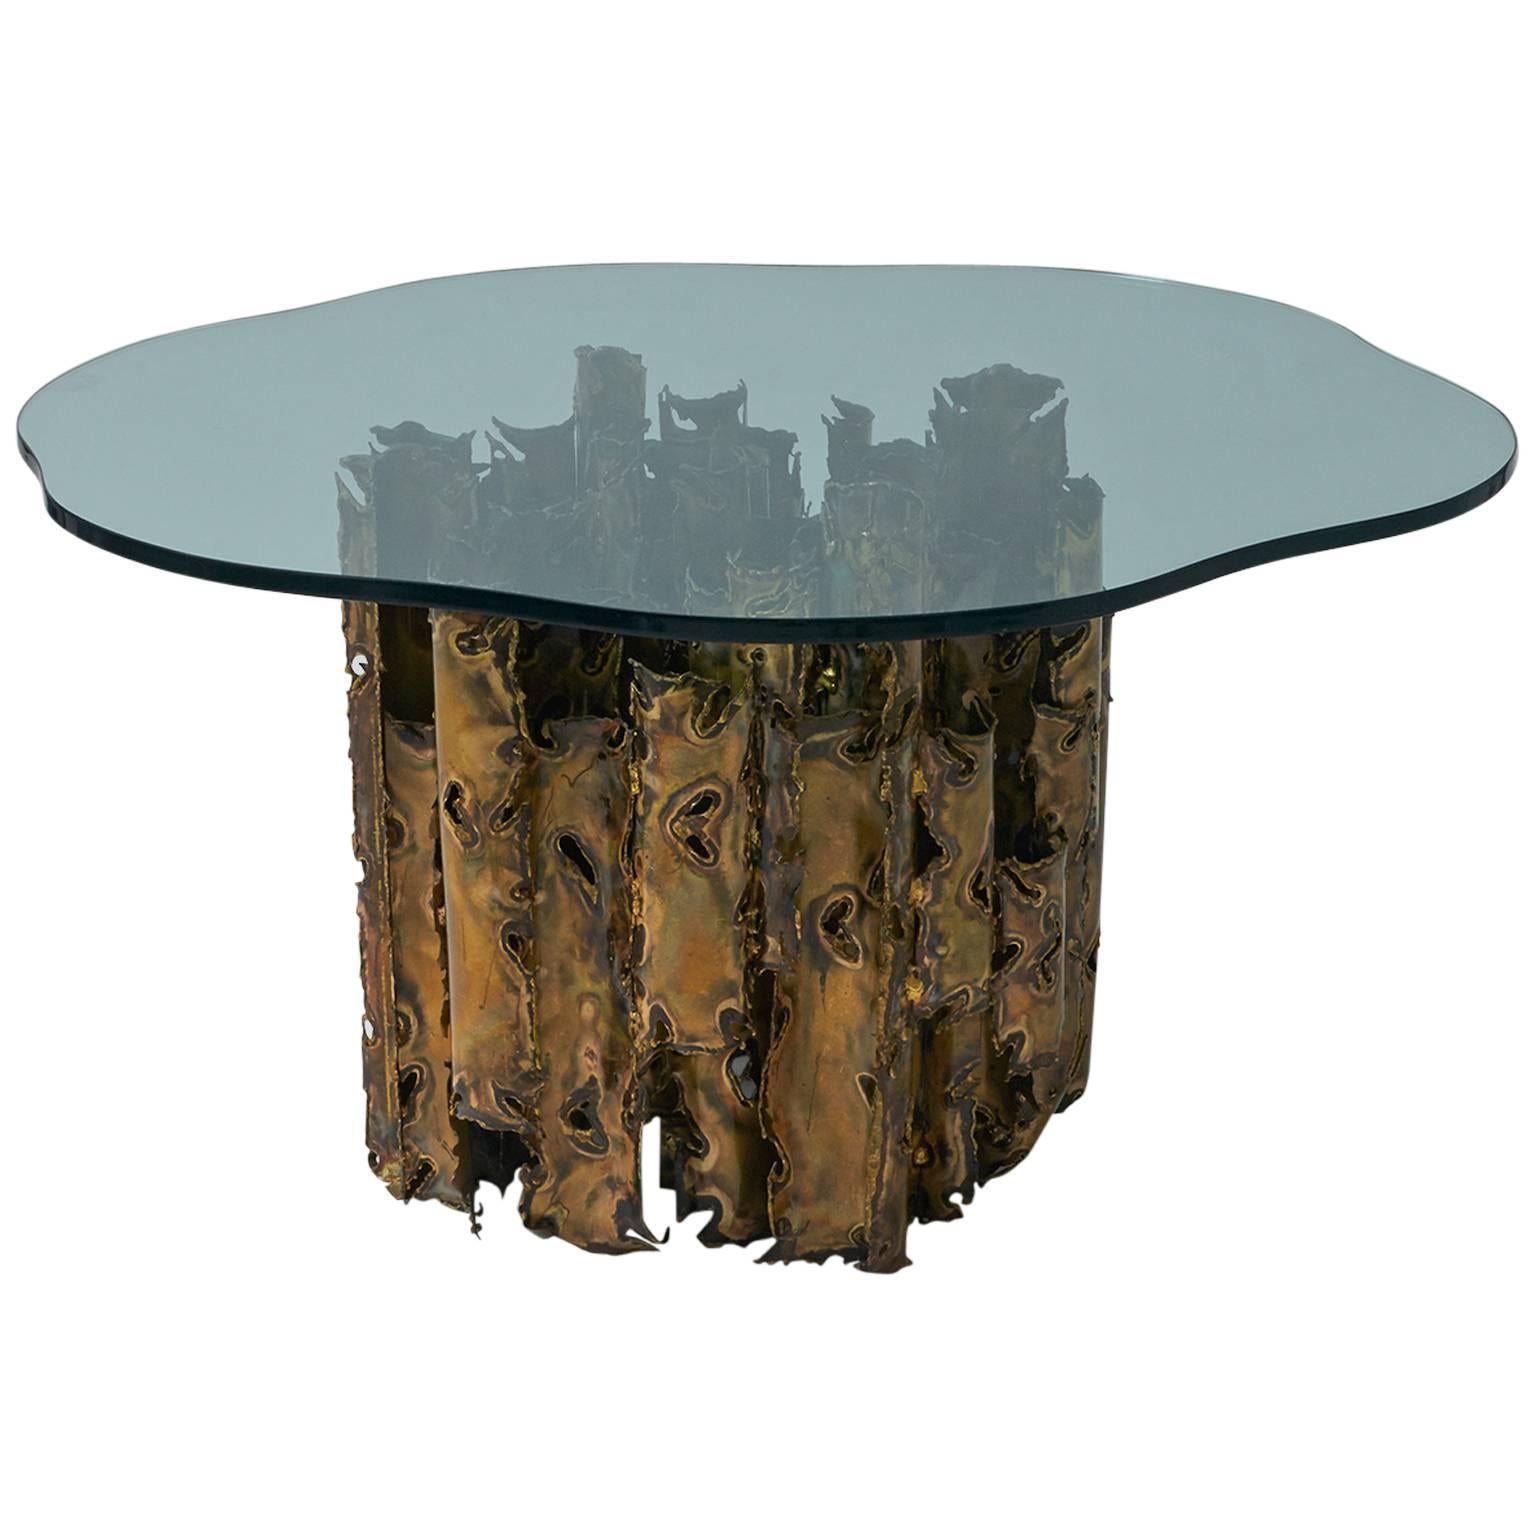 Silas Seandel, Cathedral Series Dining Table